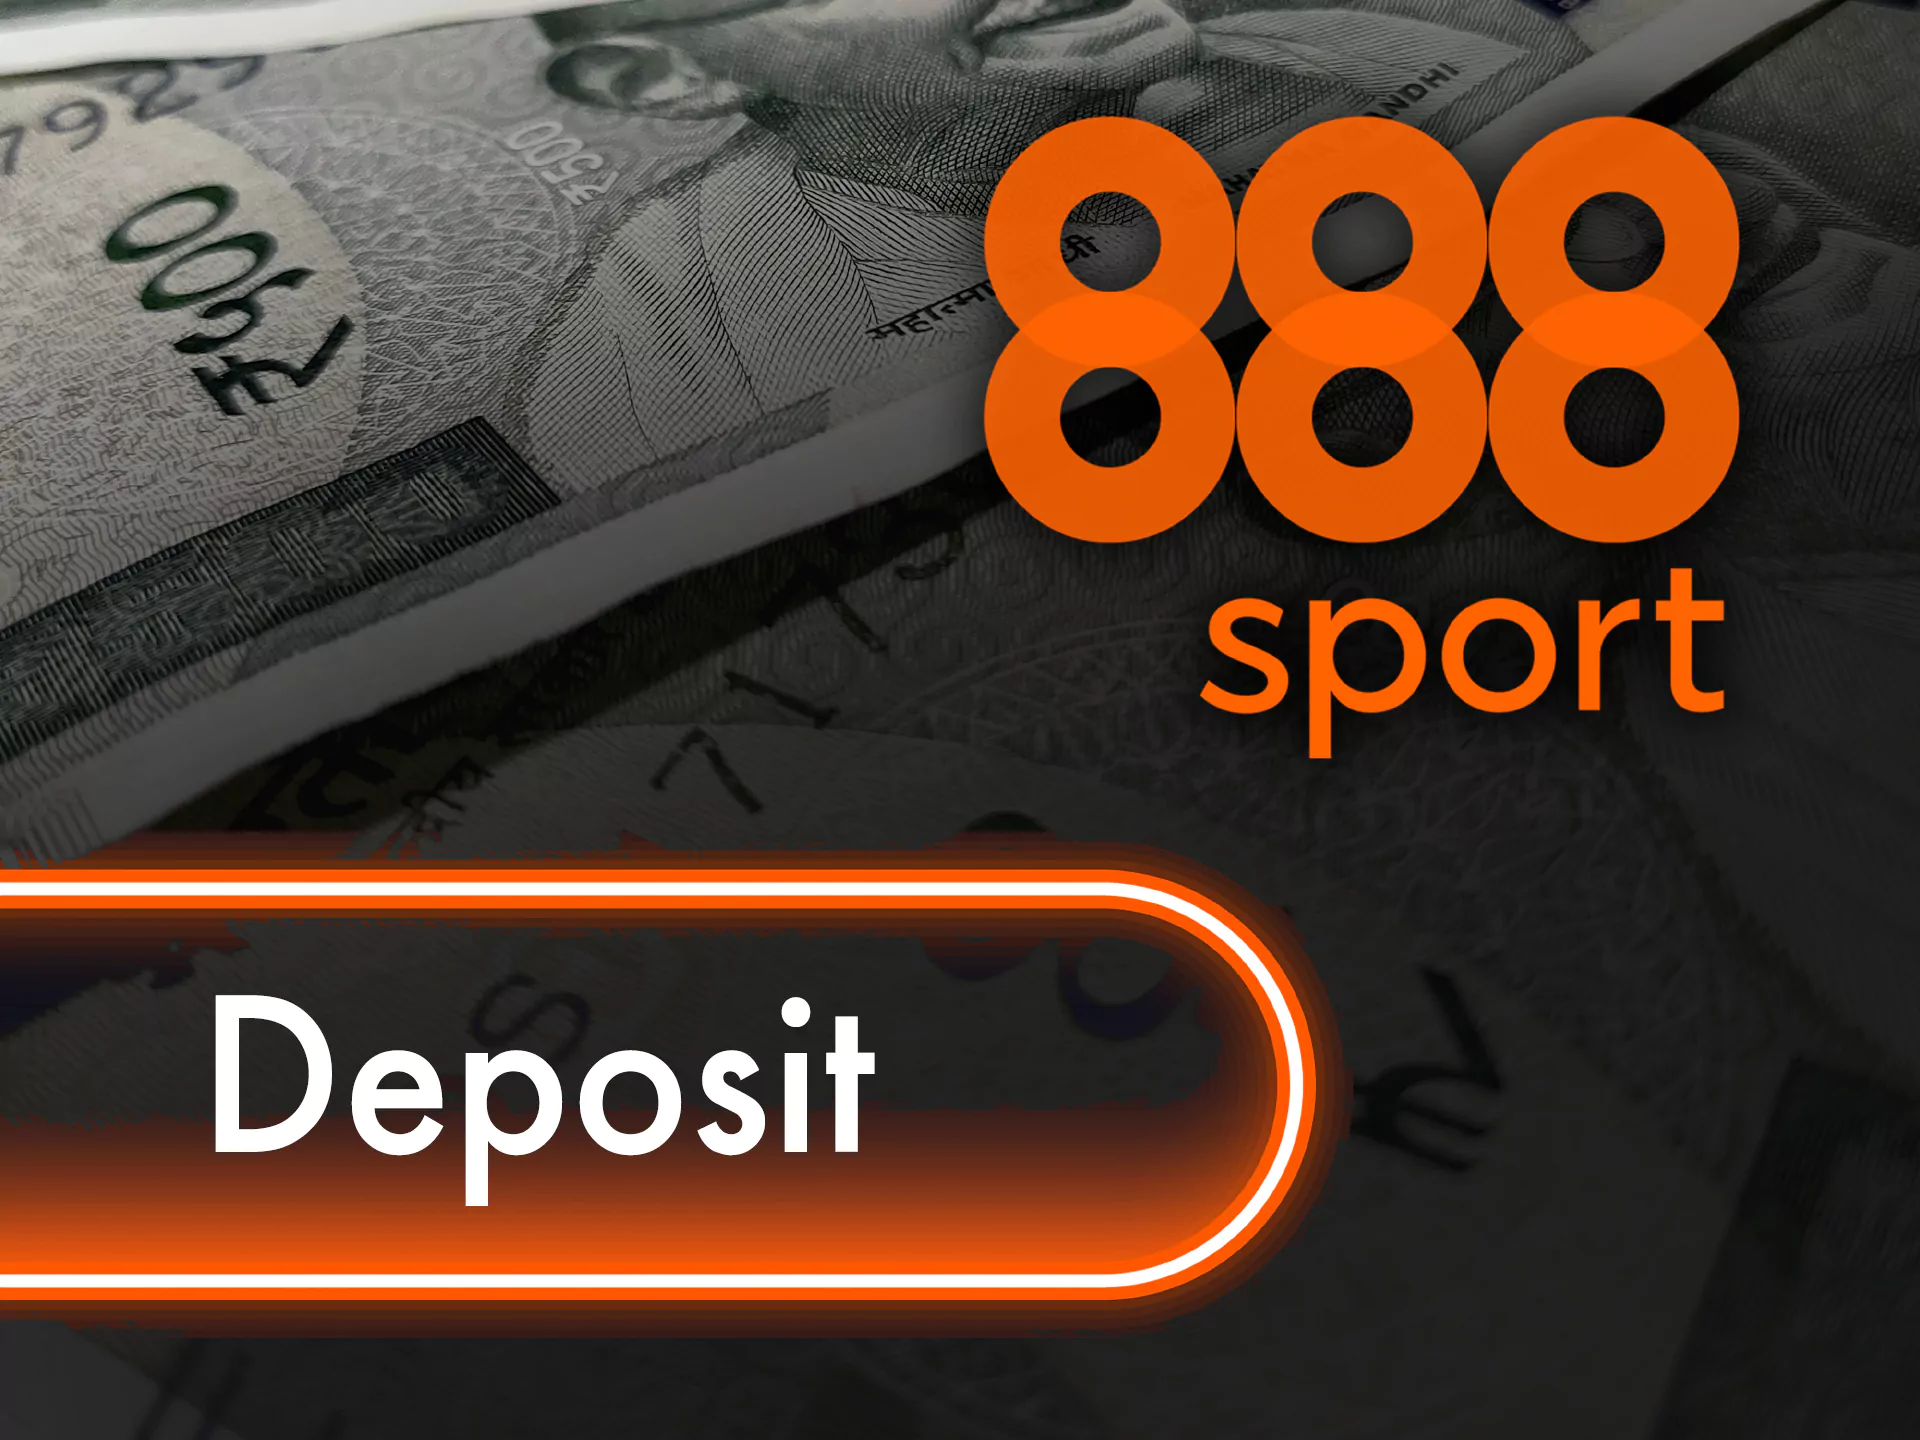 To deposit money to your 888sport account, you have to open a cashier and select the payment method you like the most.